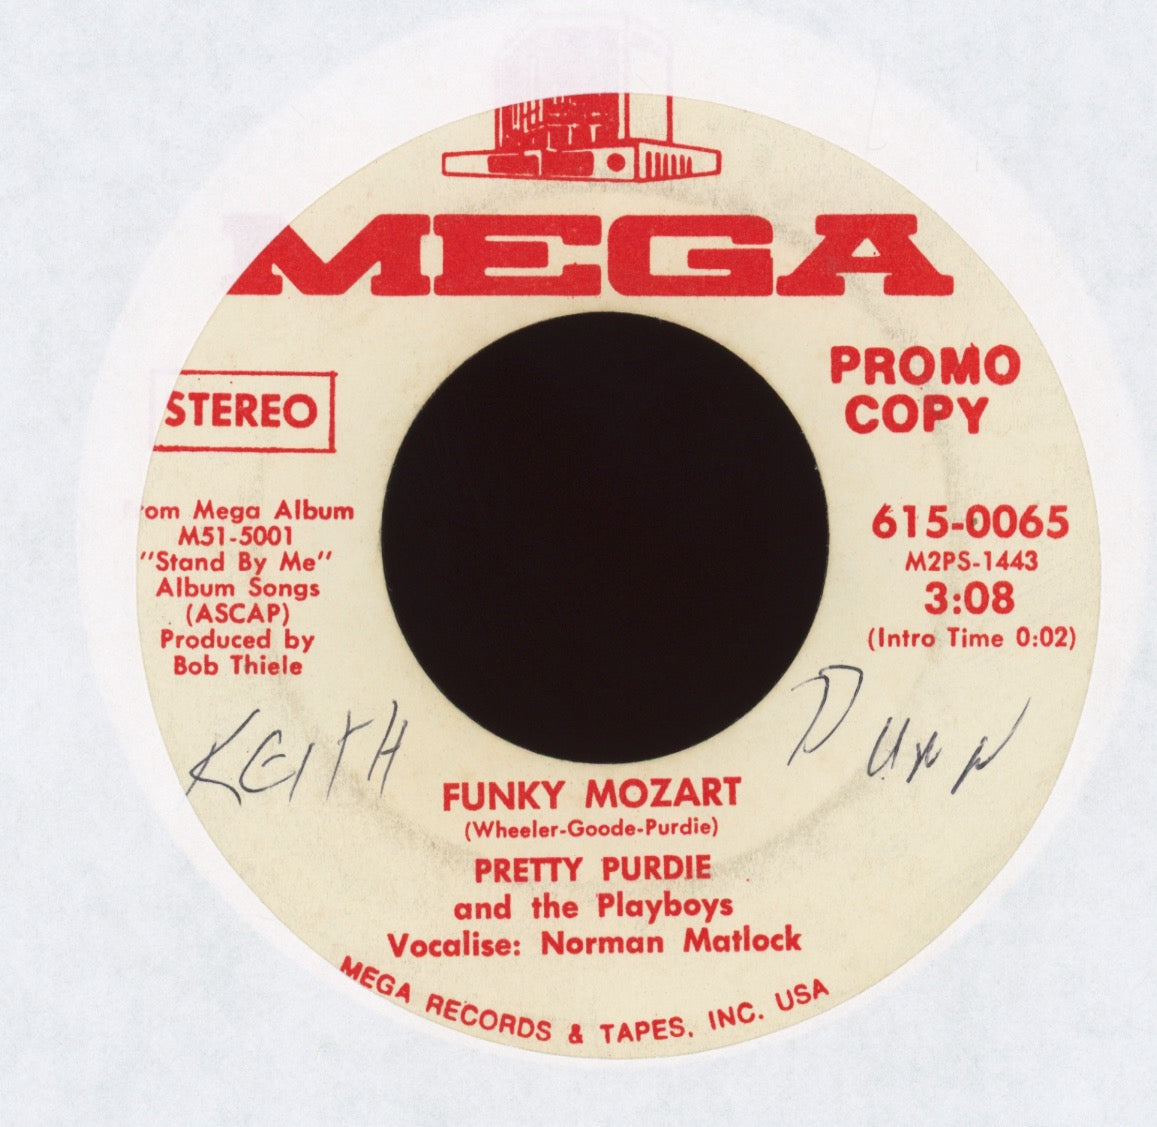 Pretty Purdie And The Playboys - Funky Mozart on Mega Promo